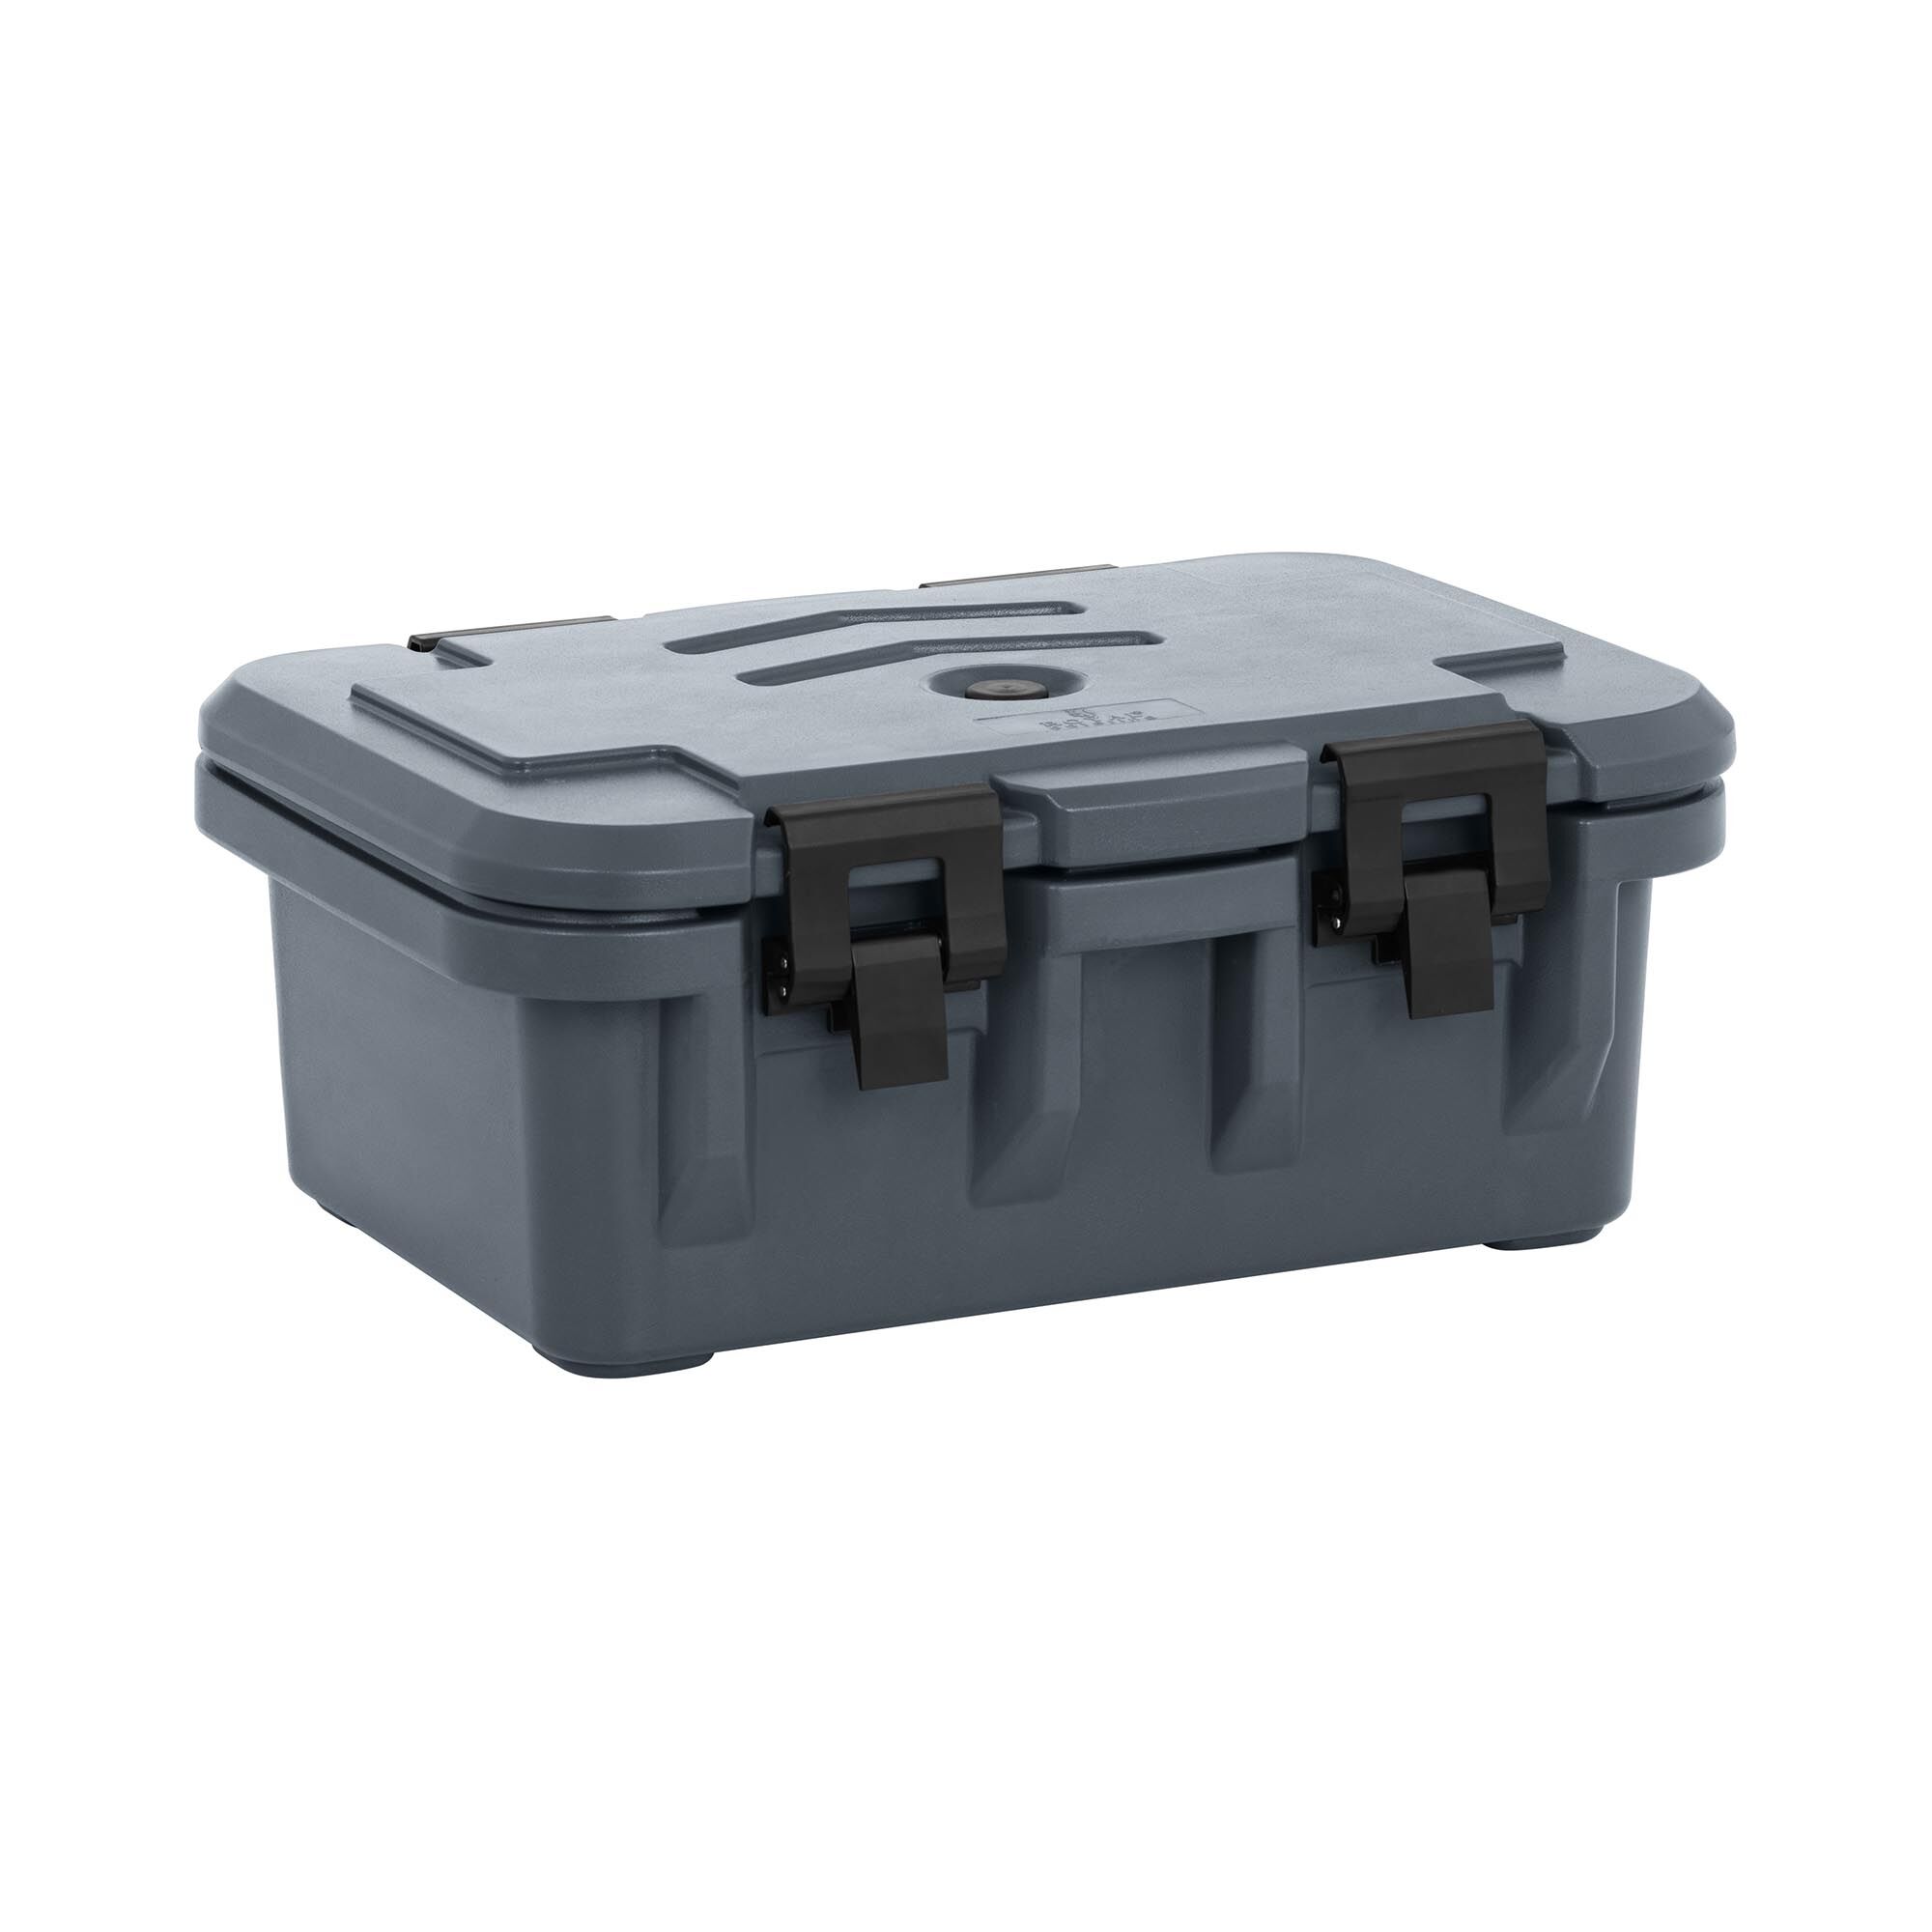 Royal Catering Thermobox - Toplader - für GN Behälter (15 cm tief) 10011866